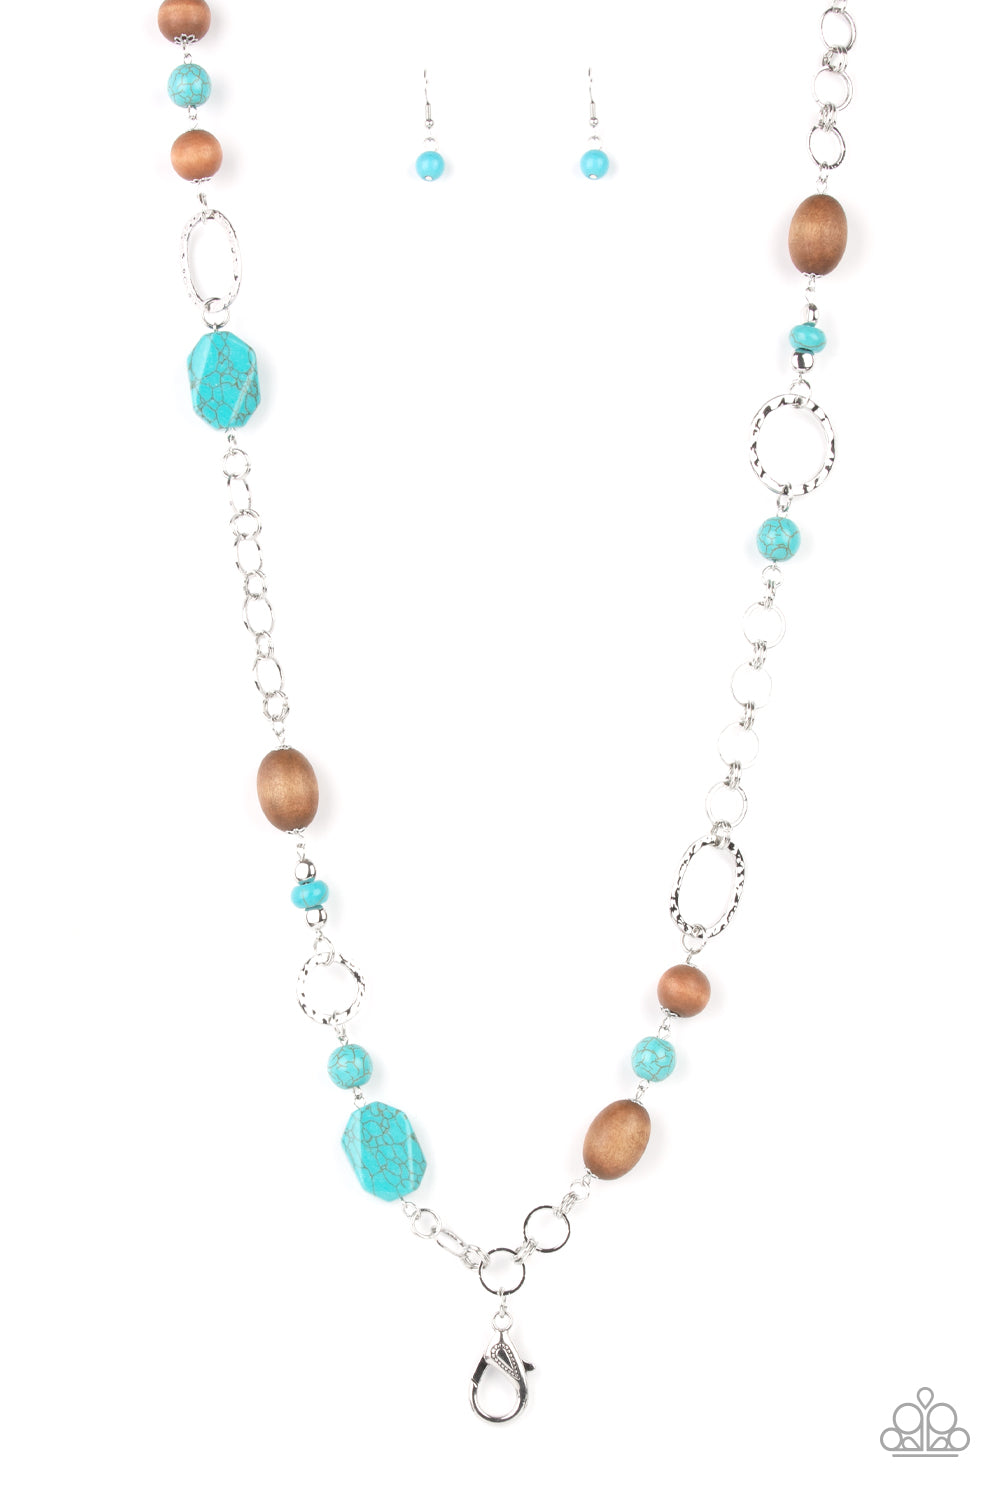 PRAIRIE RESERVE - BLUE/TURQUOISE LANYARD NECKLACE